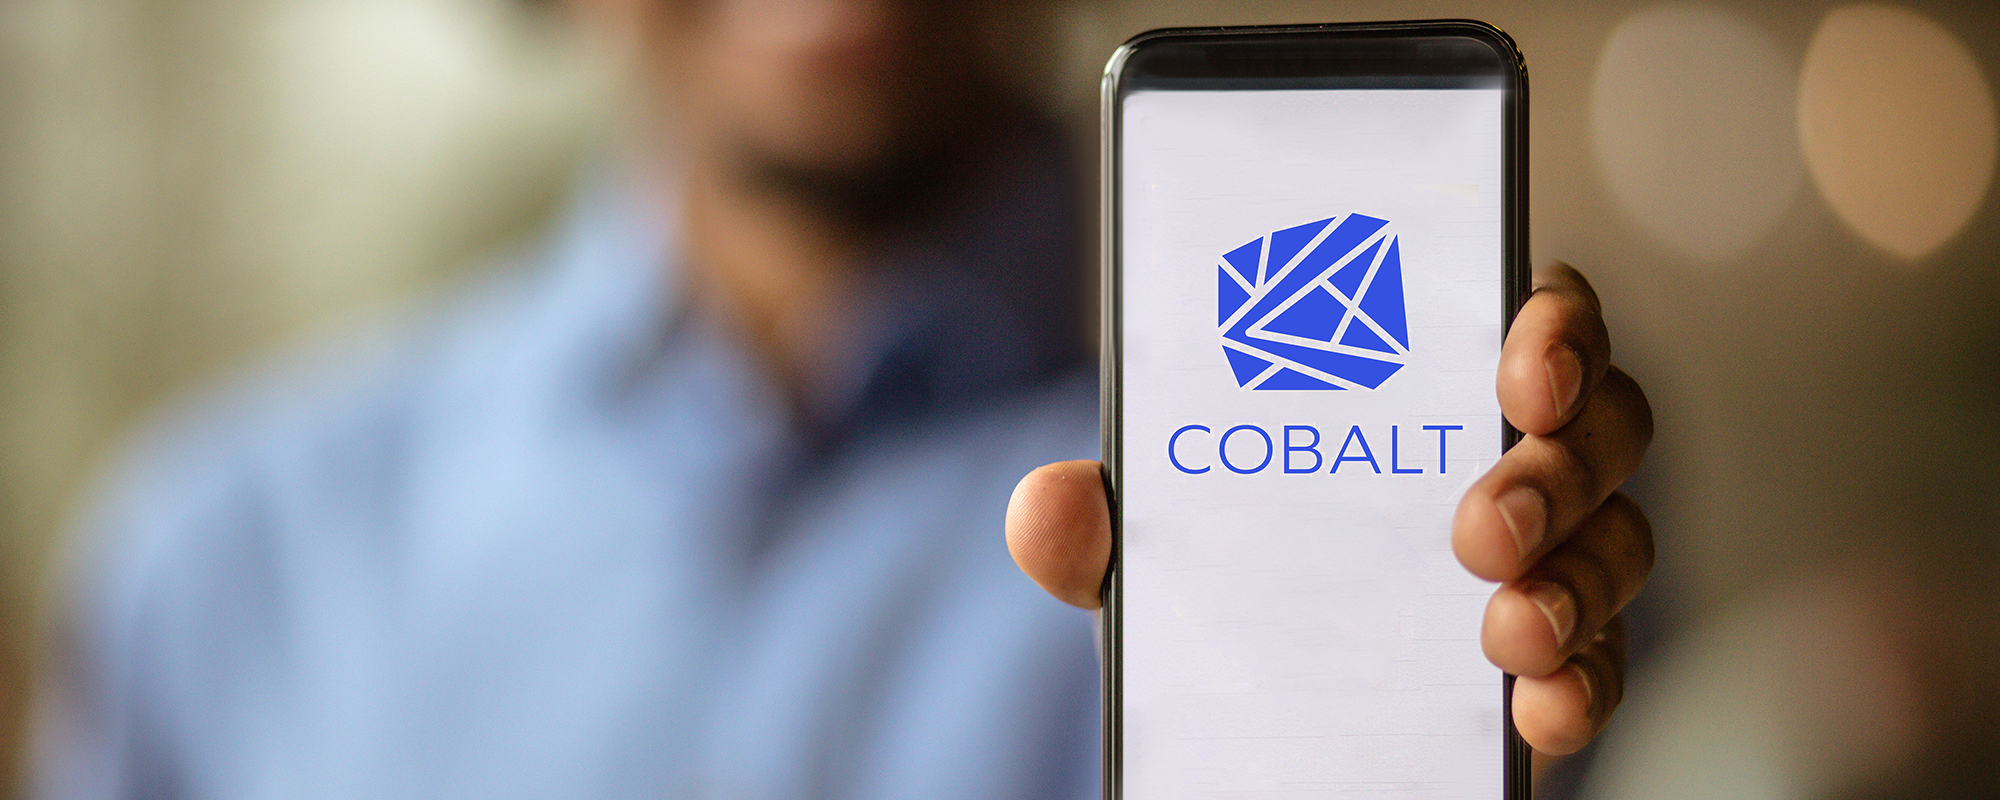 Person holding up a phone with screen displaying "COBALT" and program logo